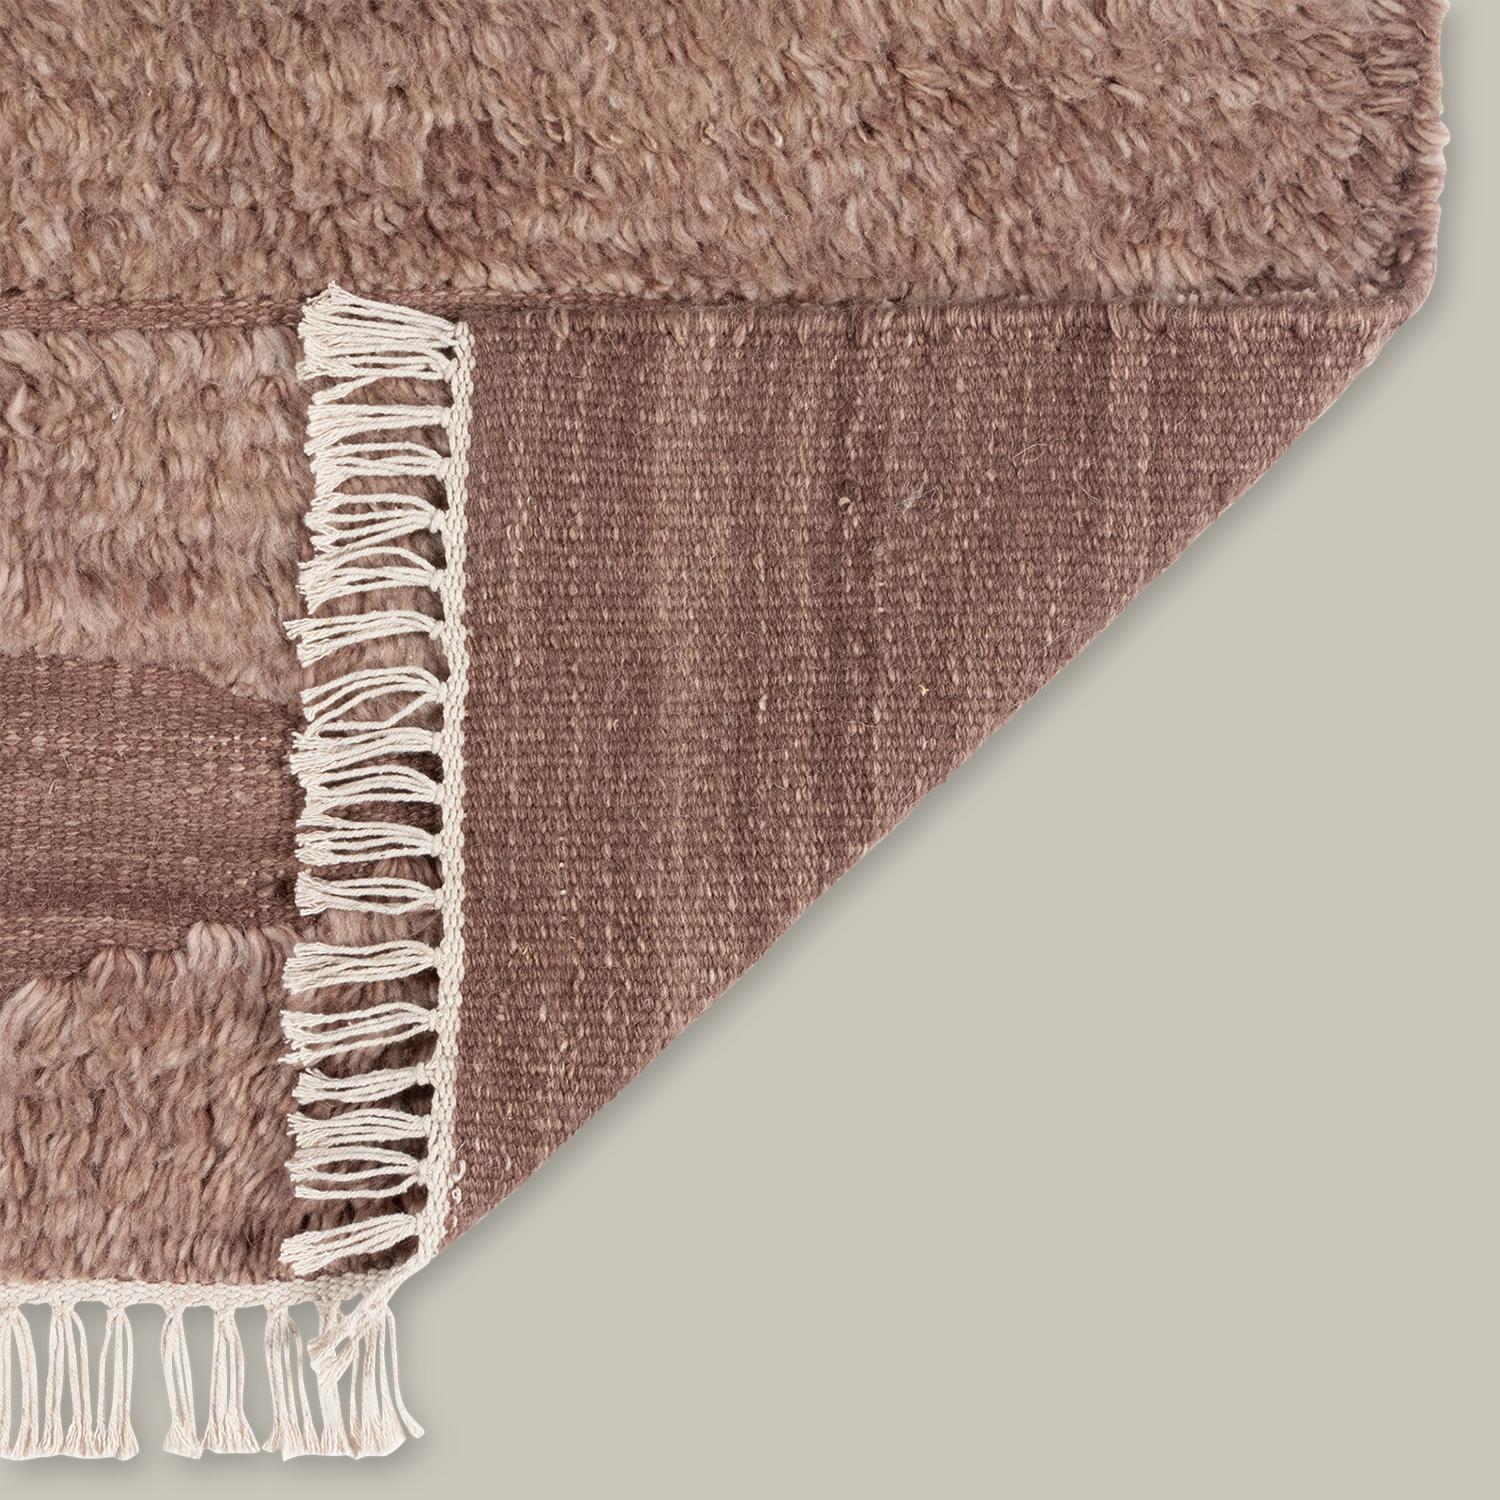 Contemporary “Rafalla Tumeni” Handwoven Wool Rug 'Brown' by Christiane Lemieux For Sale